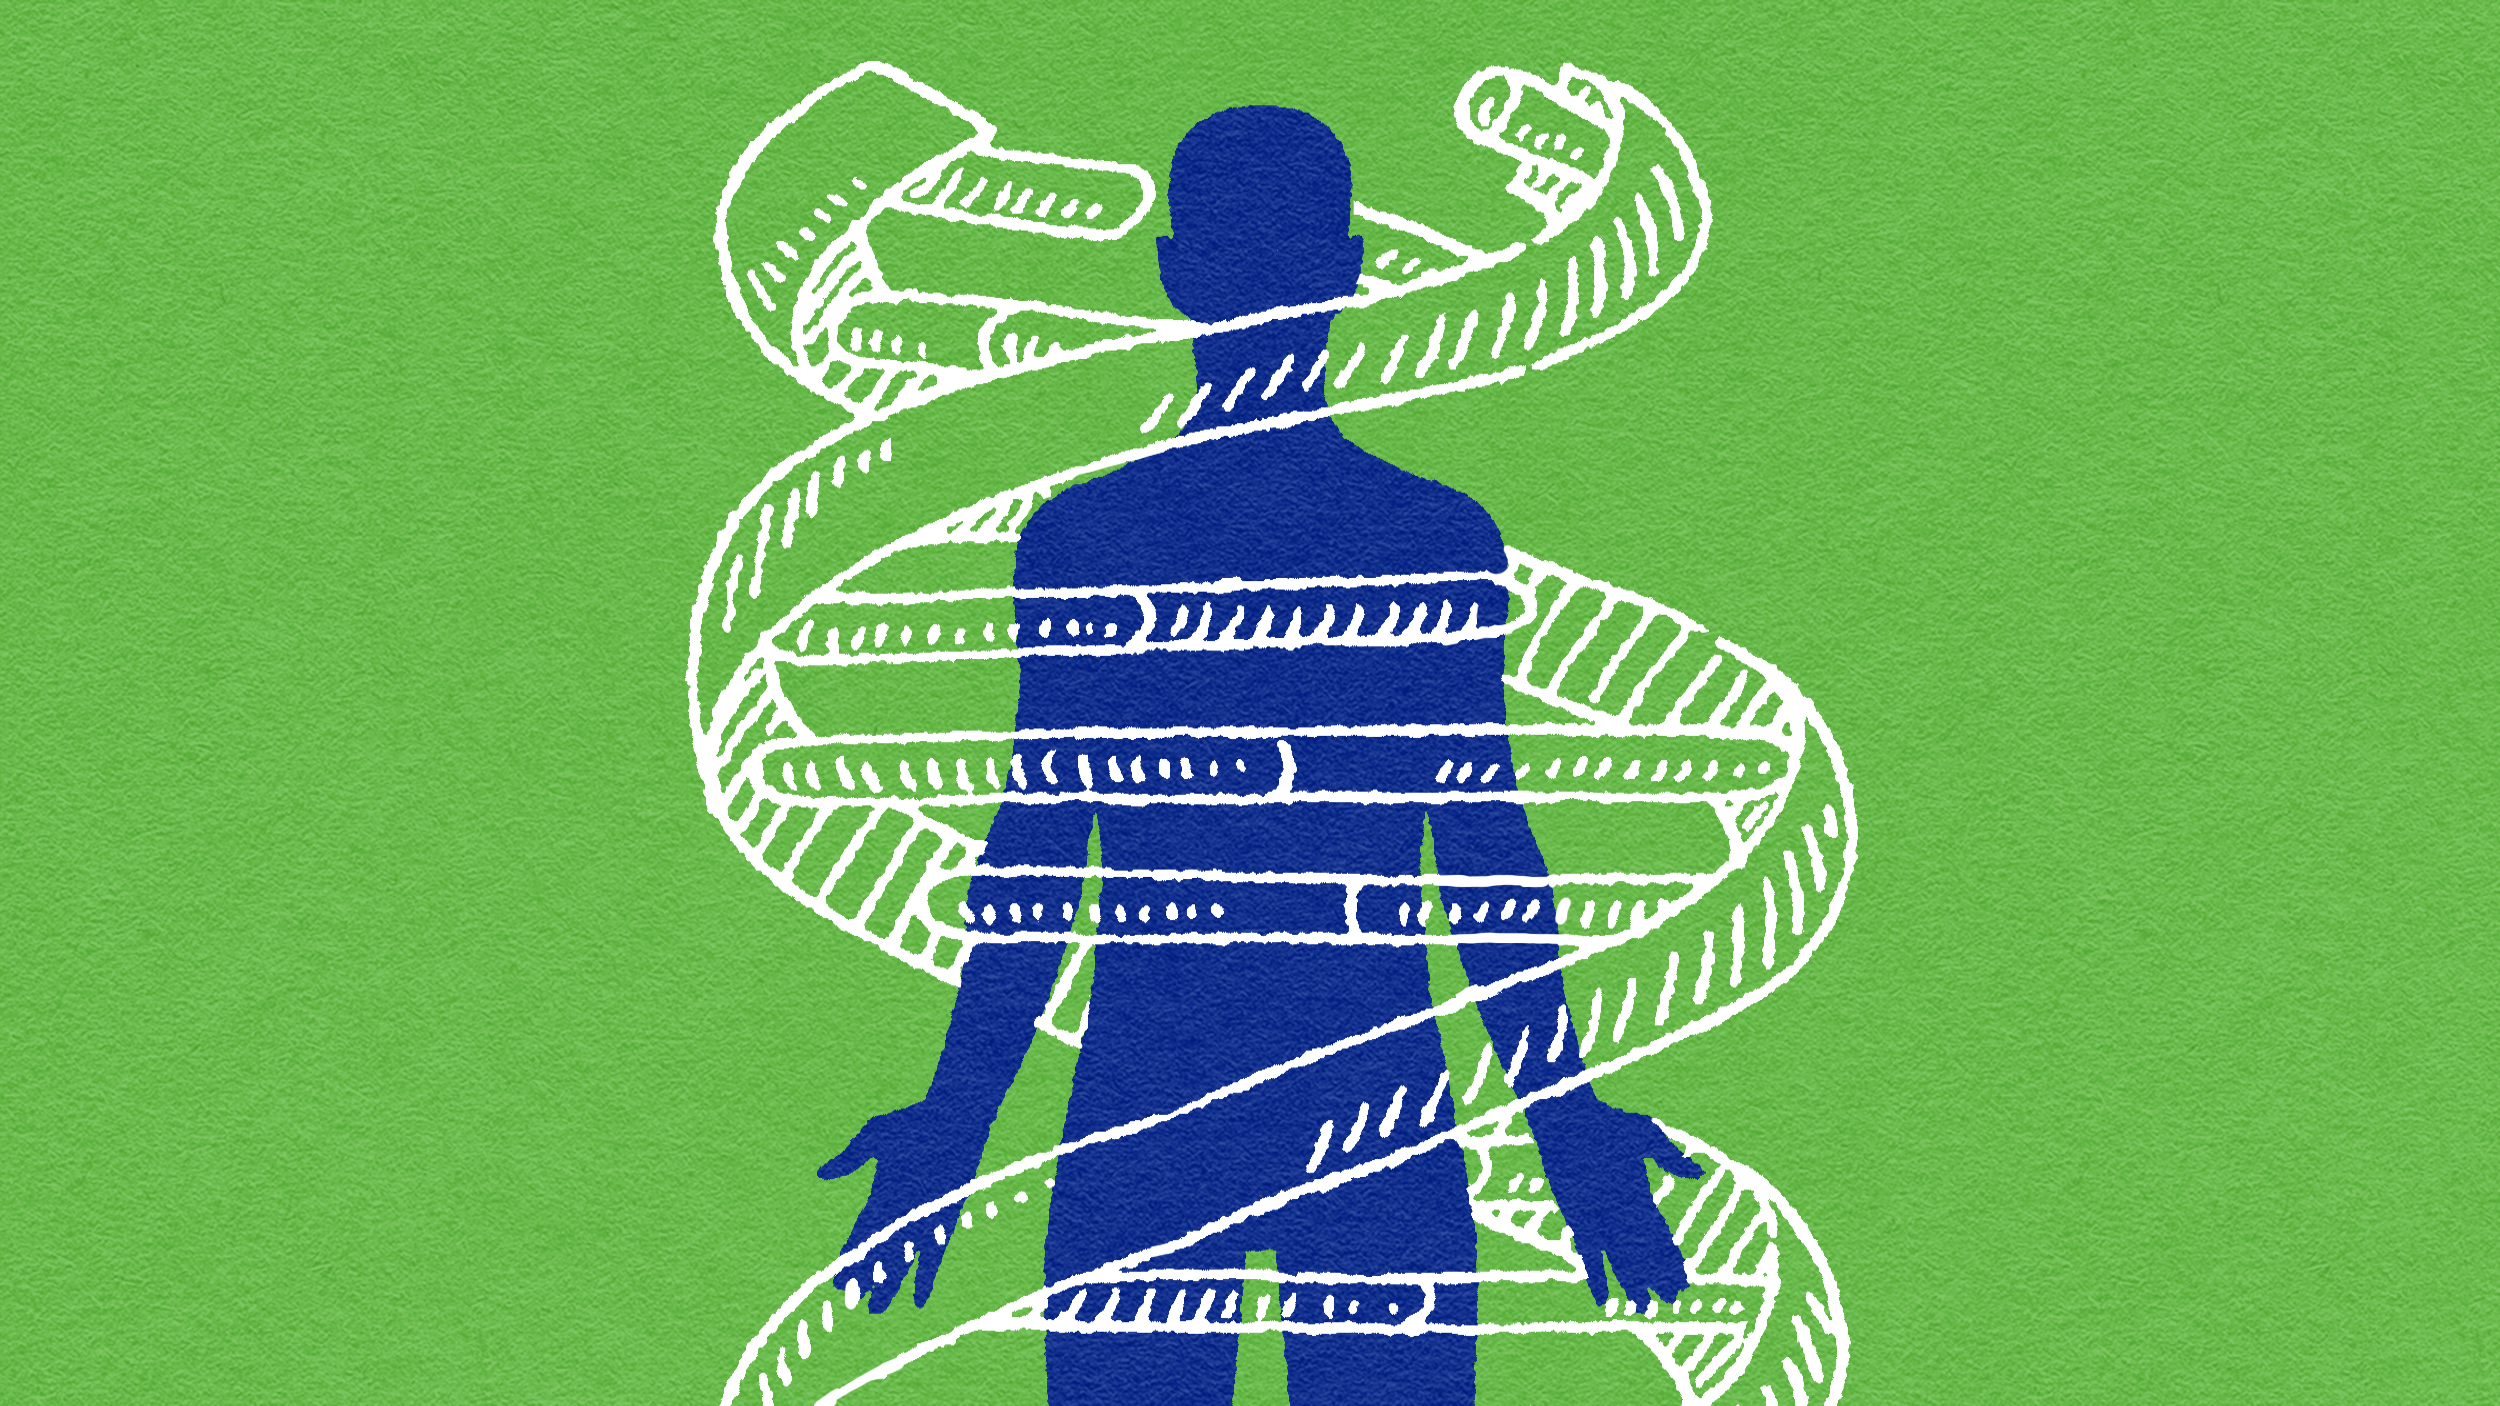 A blue and white drawing of a person wrapped in a tape illustrating genetic determinism.